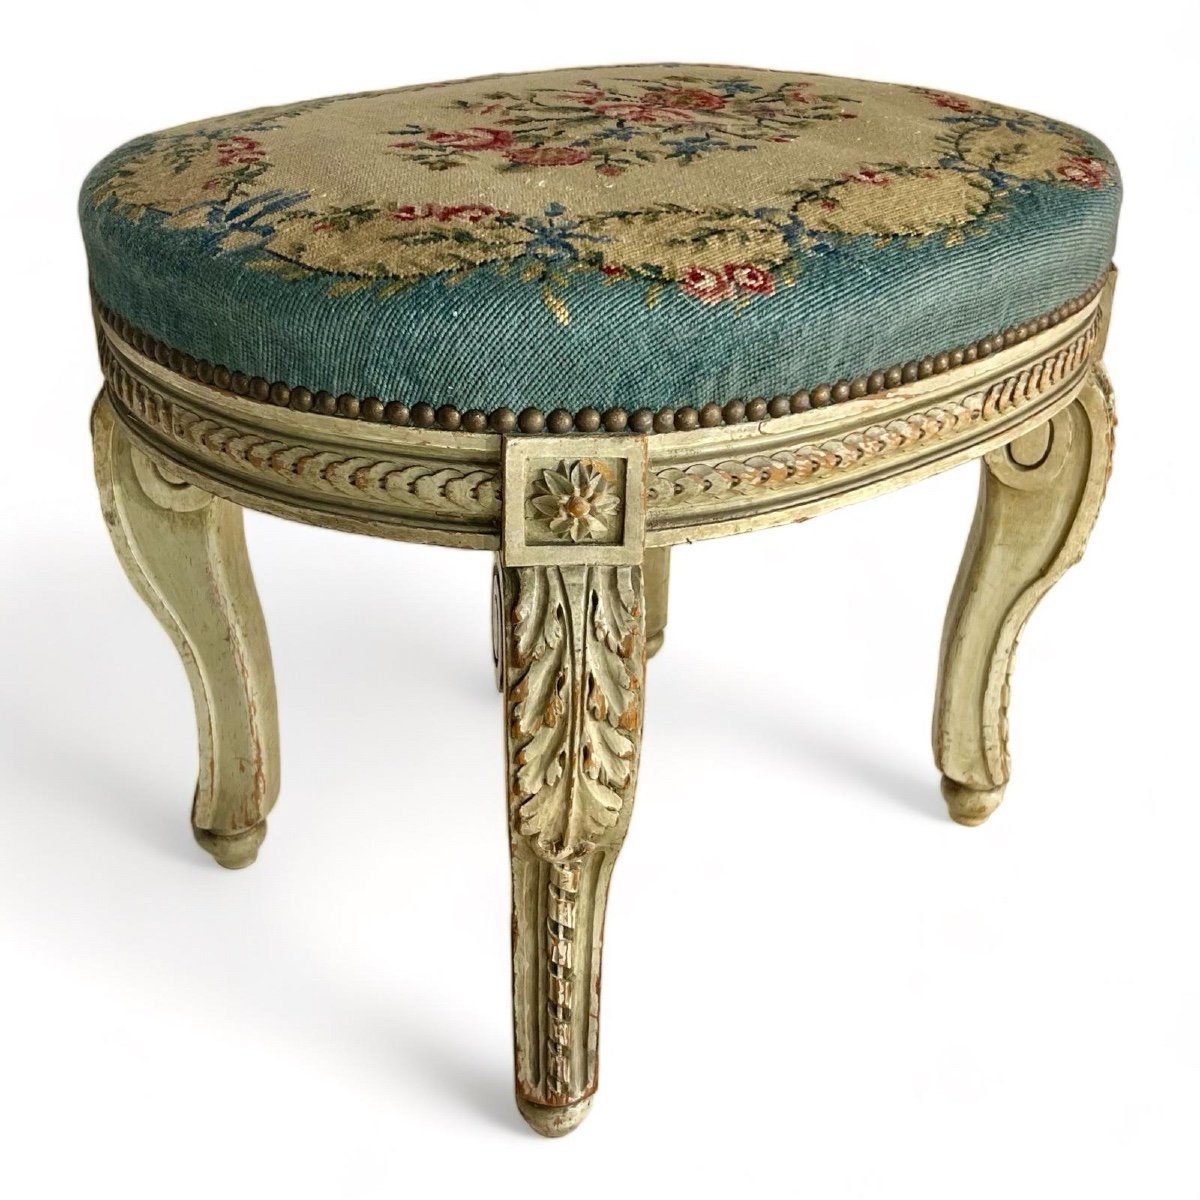 Lacquered Wood Stool From Transition Style And Napoleon Ili Period -photo-3